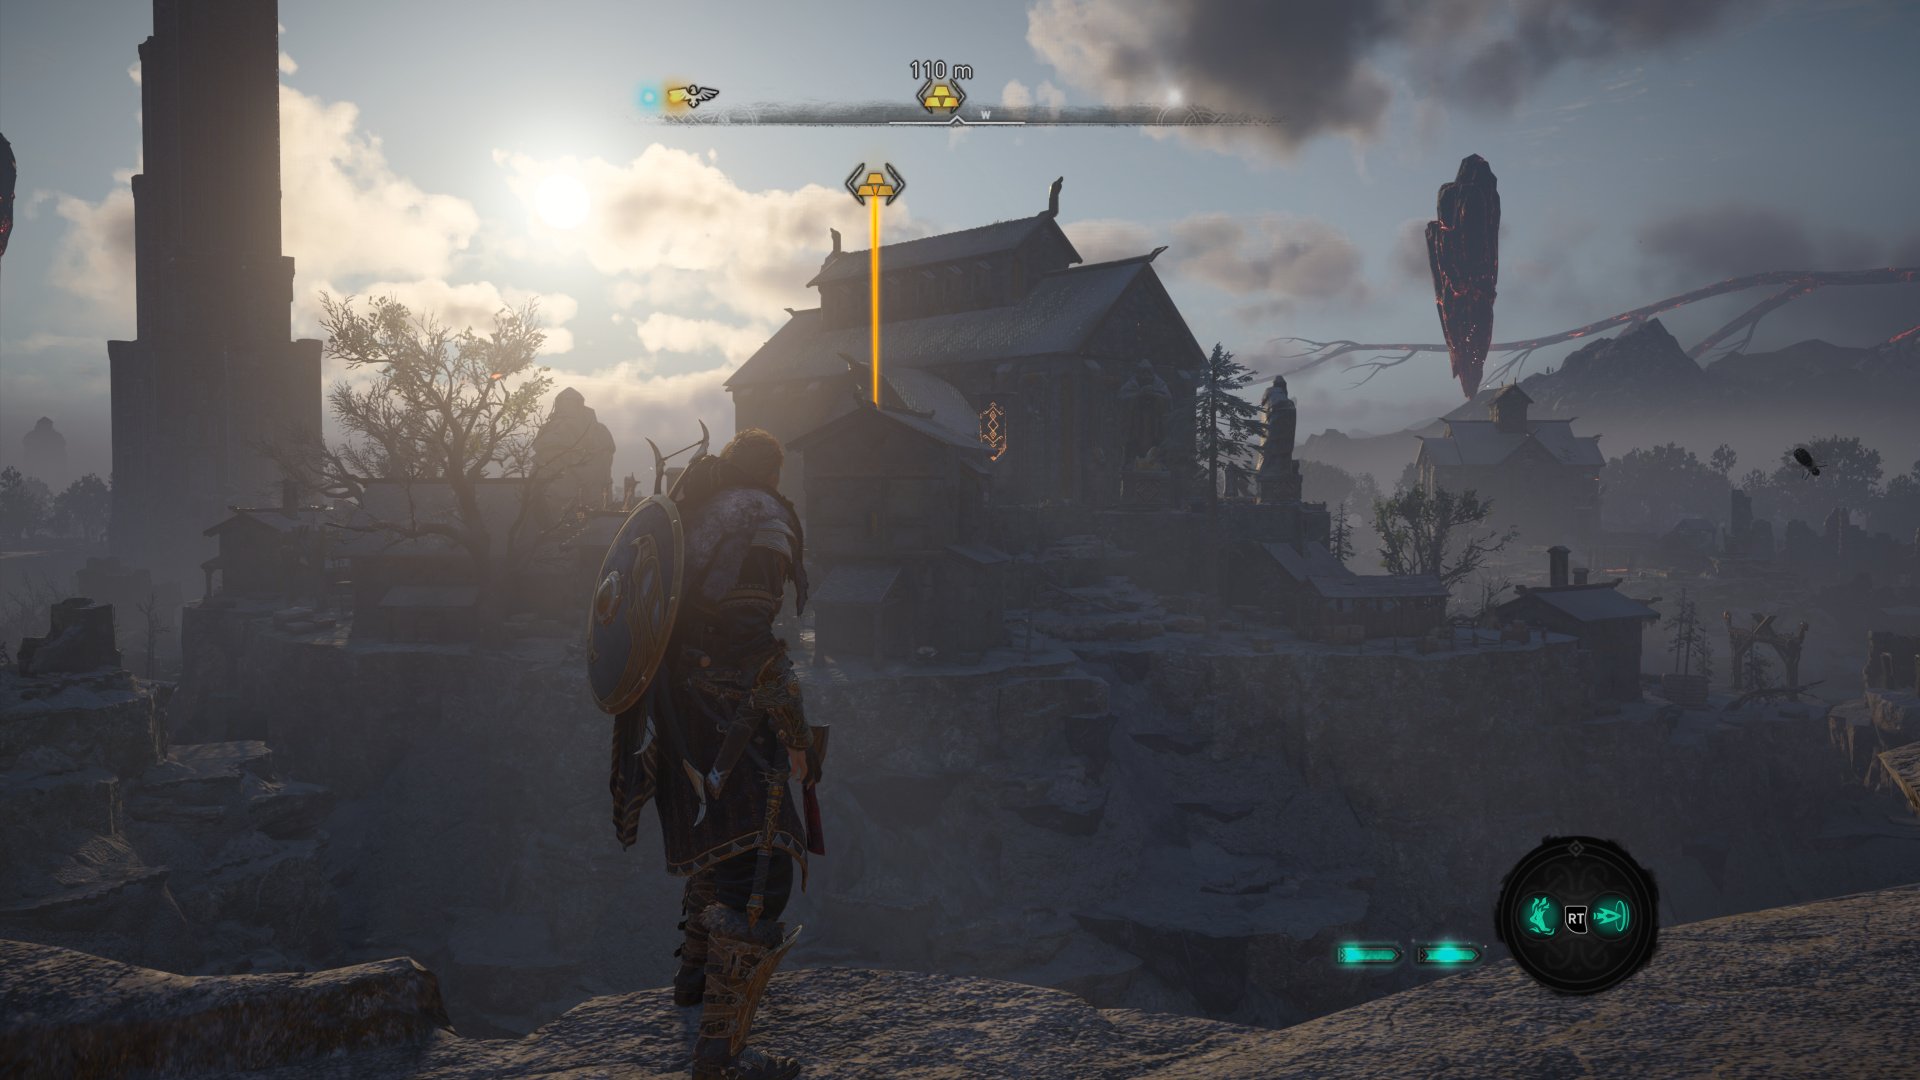 Assassin's Creed Valhalla: Dawn of Ragnarök review - a sizeable